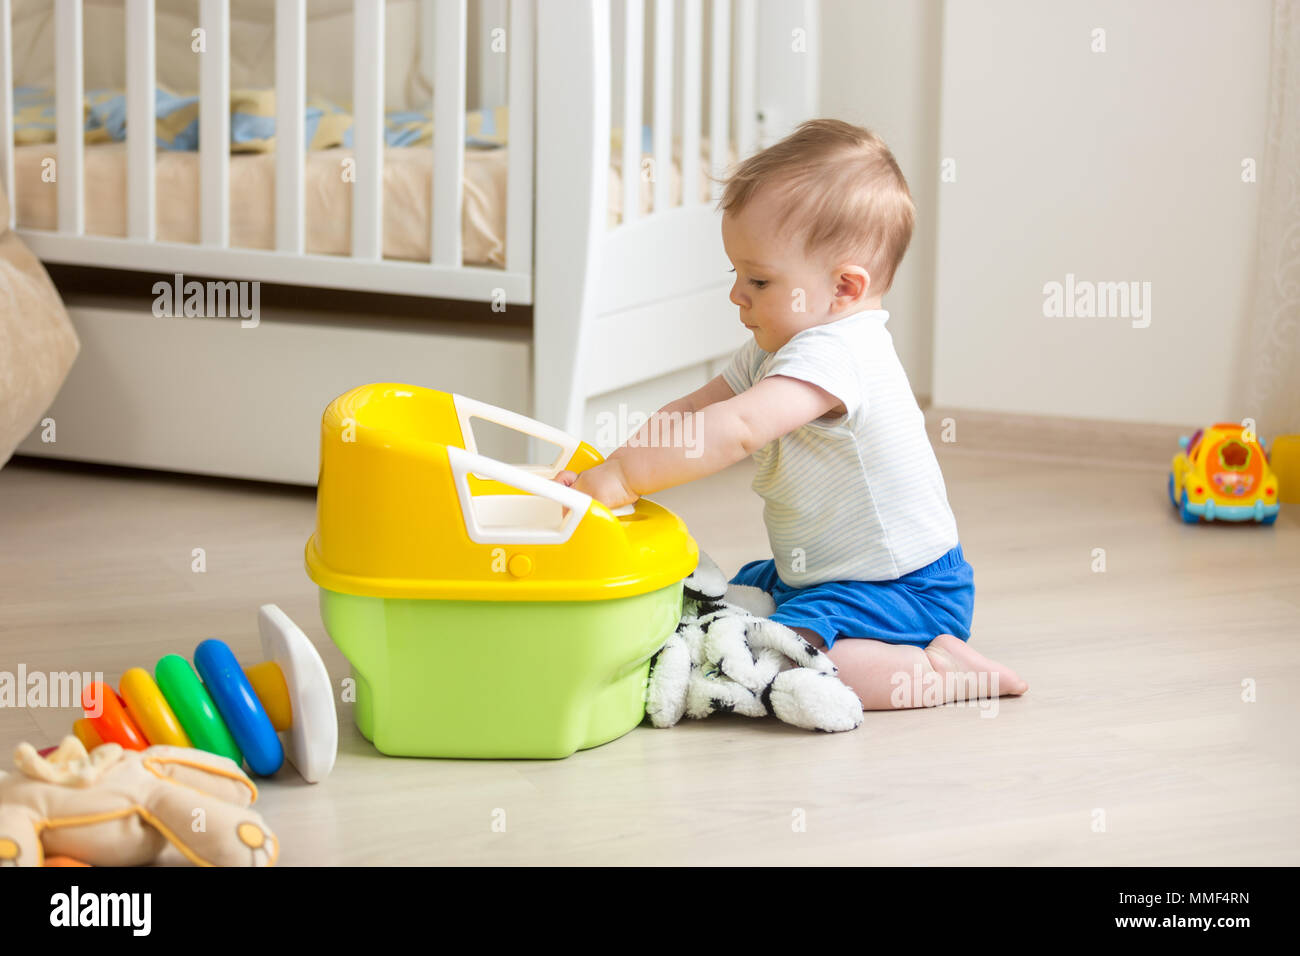 10 months old toddler boy sitting on floor and playing plastic toilet pot Stock Photo